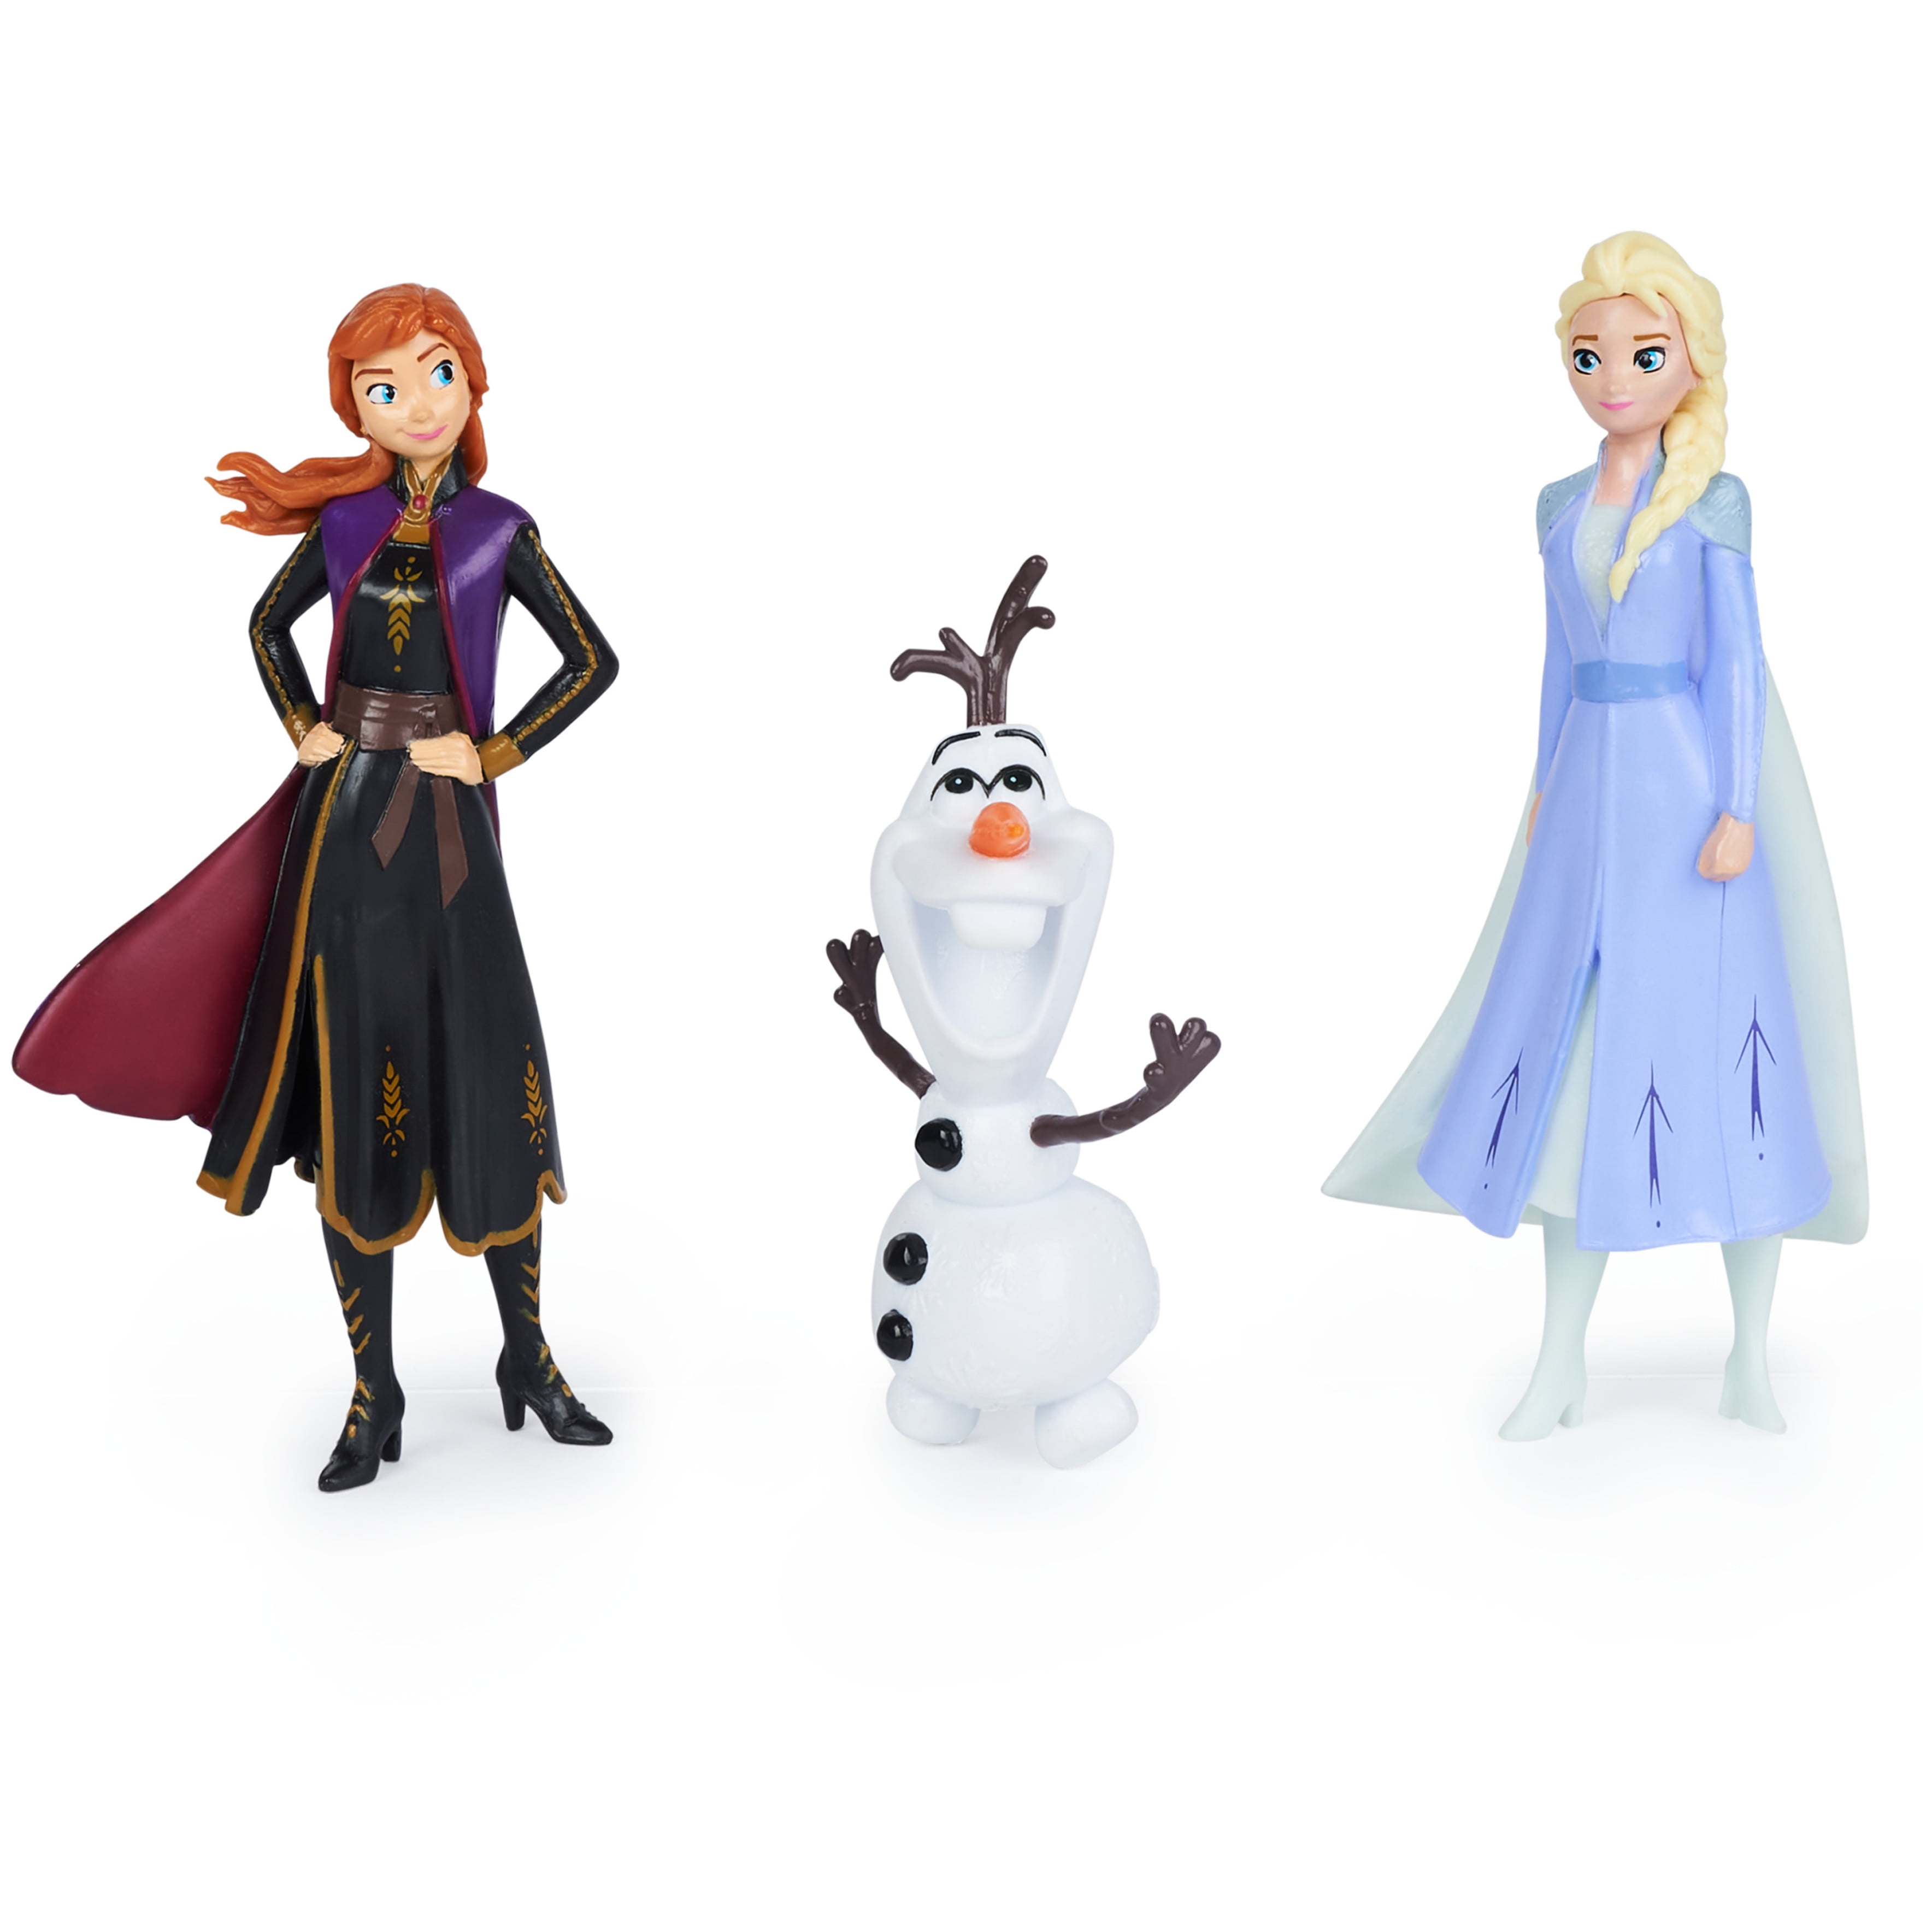 Details about   DISNEY FROZEN ANNA & ELSA INFLATABLE SWIM RING TUBE TOY FLOATS NEW 